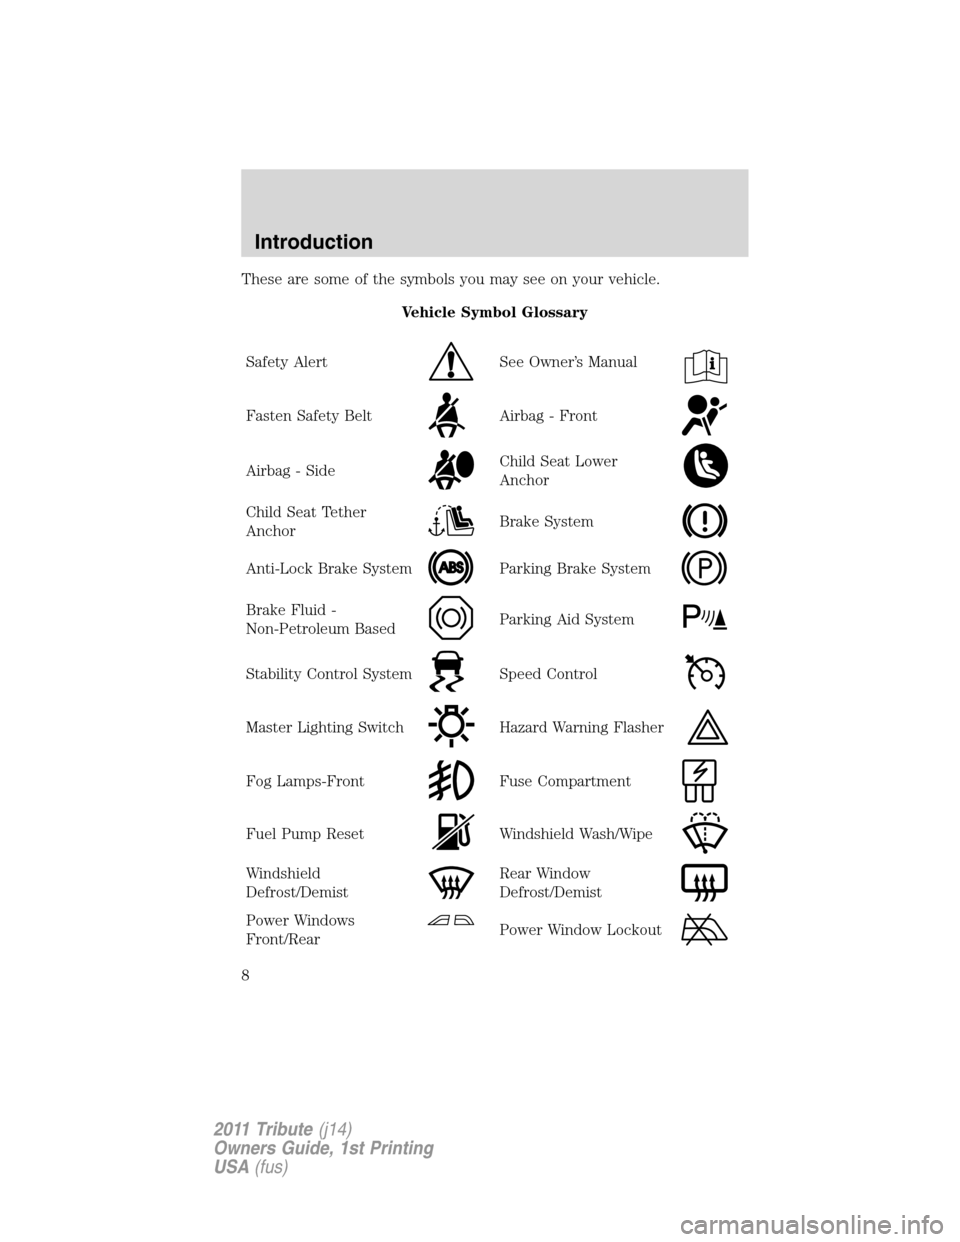 MAZDA MODEL TRIBUTE 2011  Owners Manual (in English) These are some of the symbols you may see on your vehicle.
Vehicle Symbol Glossary
Safety Alert
See Owner’s Manual
Fasten Safety BeltAirbag - Front
Airbag - SideChild Seat Lower
Anchor
Child Seat Te